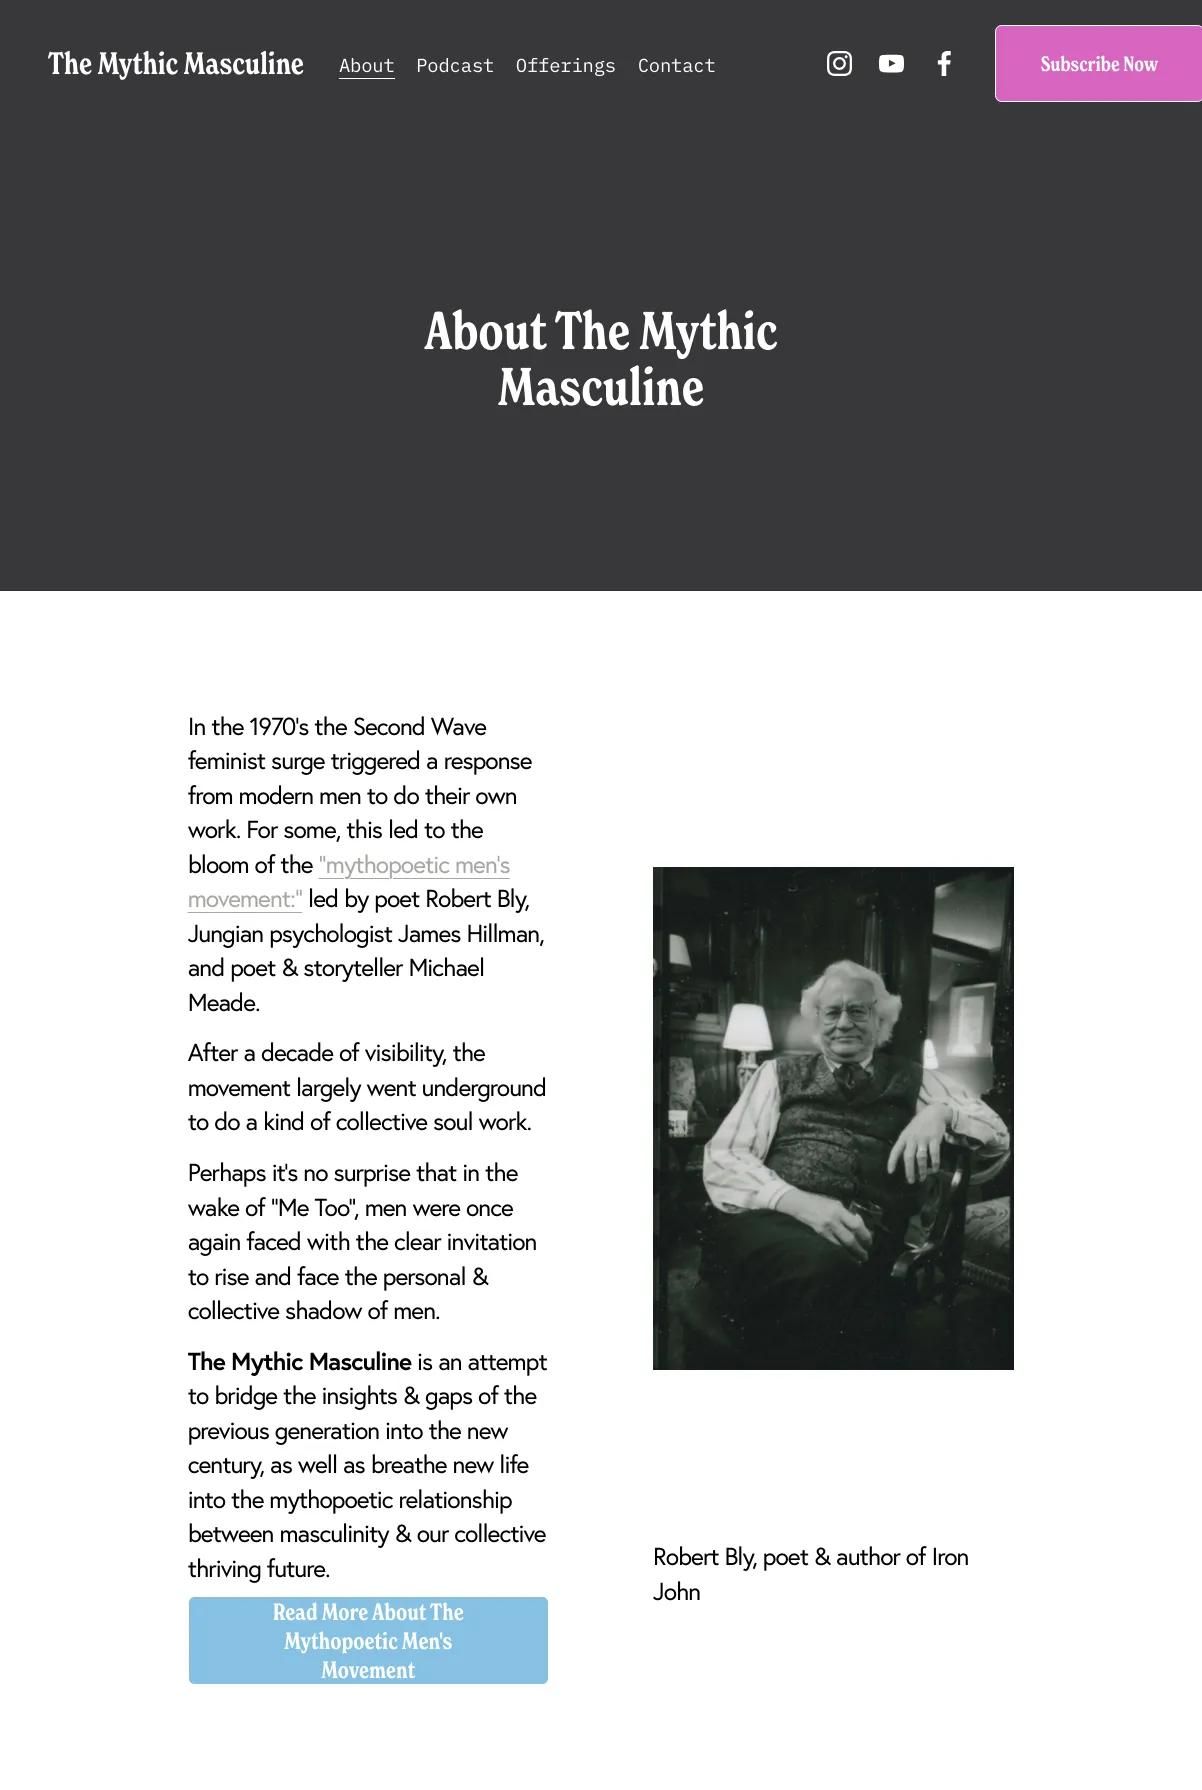 Screenshot 2 of The Mythic Masculine (Example Squarespace Podcast Website)